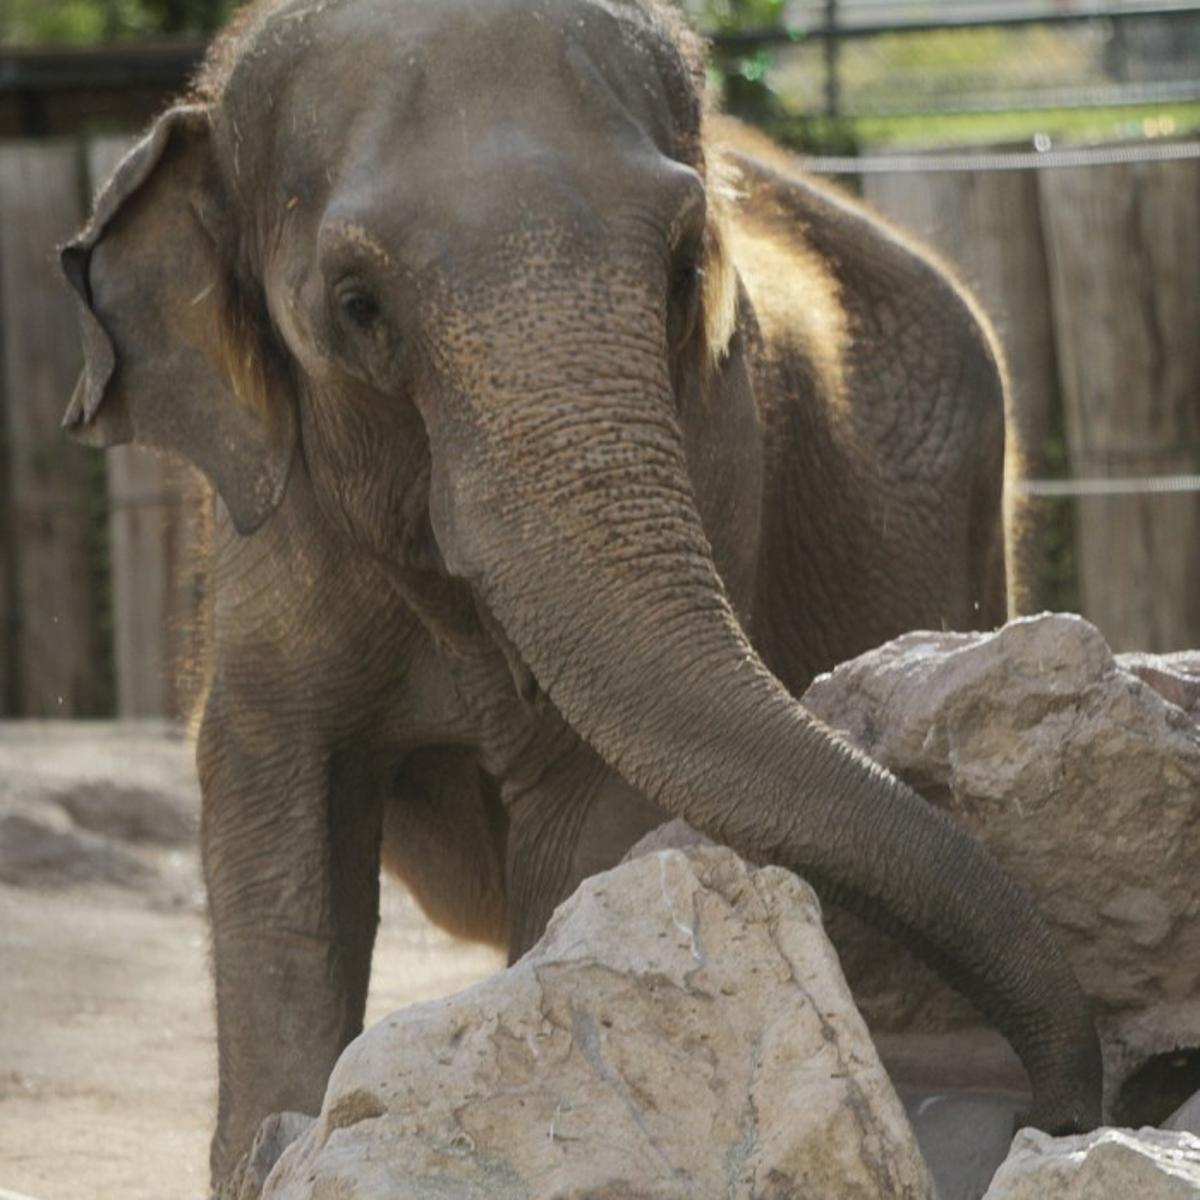 Elephant Connie had cancer, officials confirm